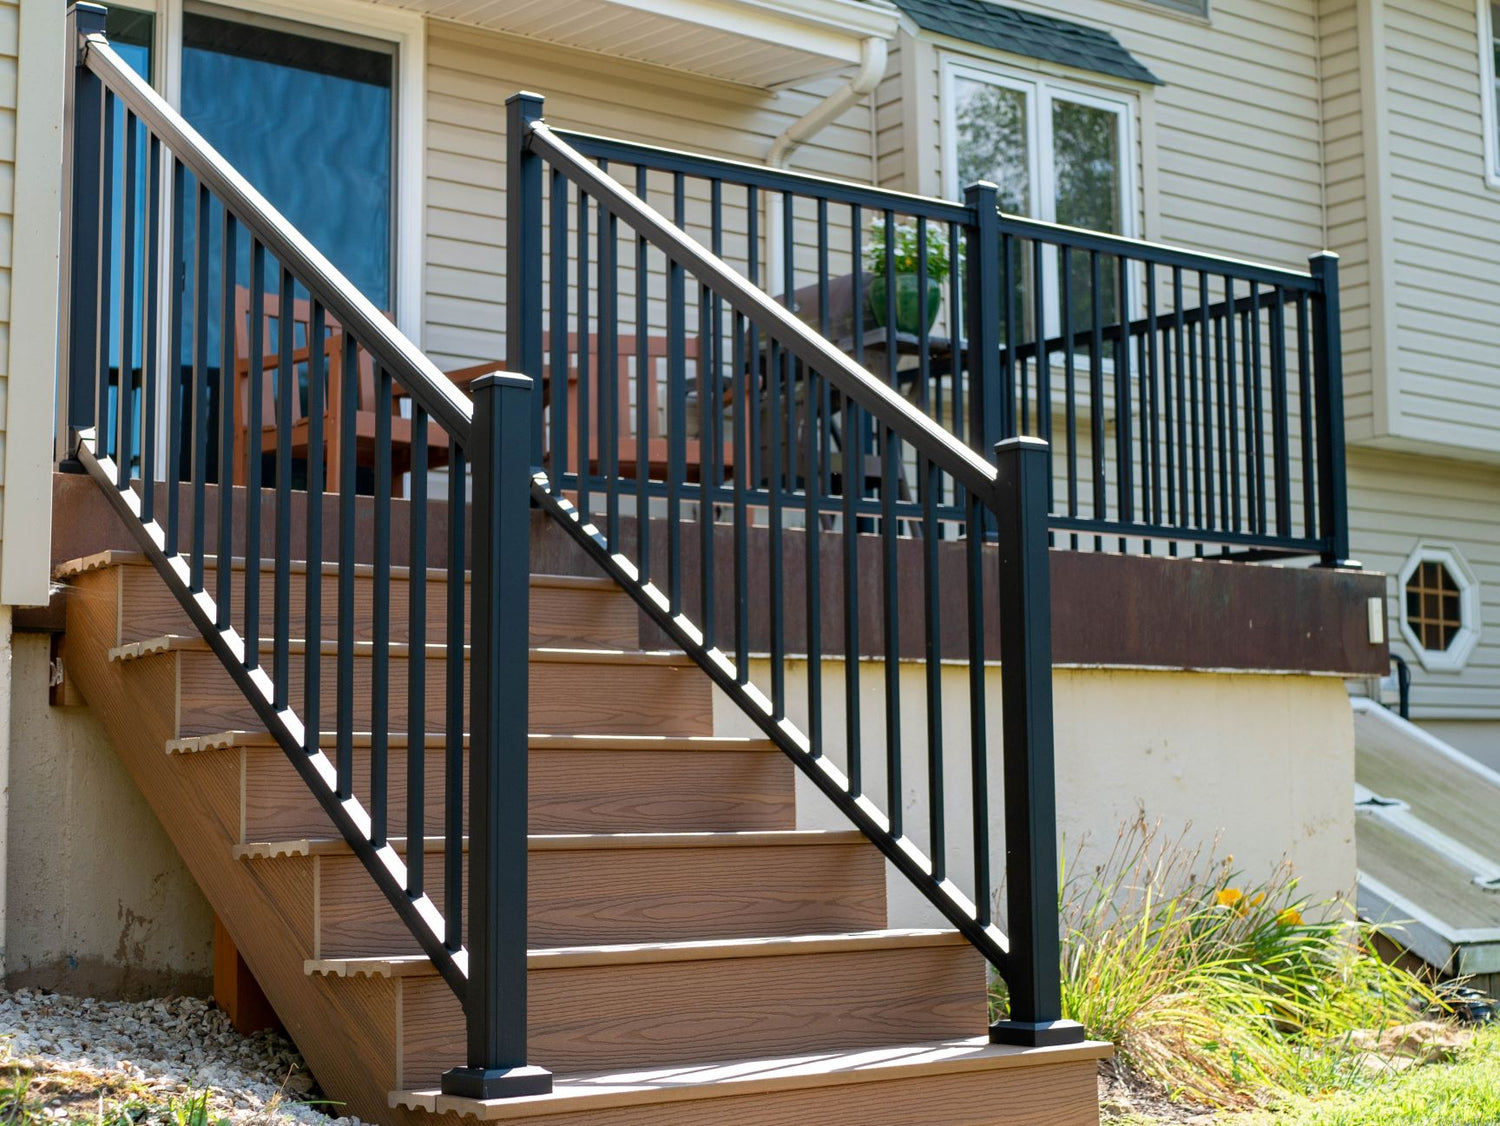 Deck railing advantage handrail does level and stair rail and utilizes a special fluted post for easy installation!